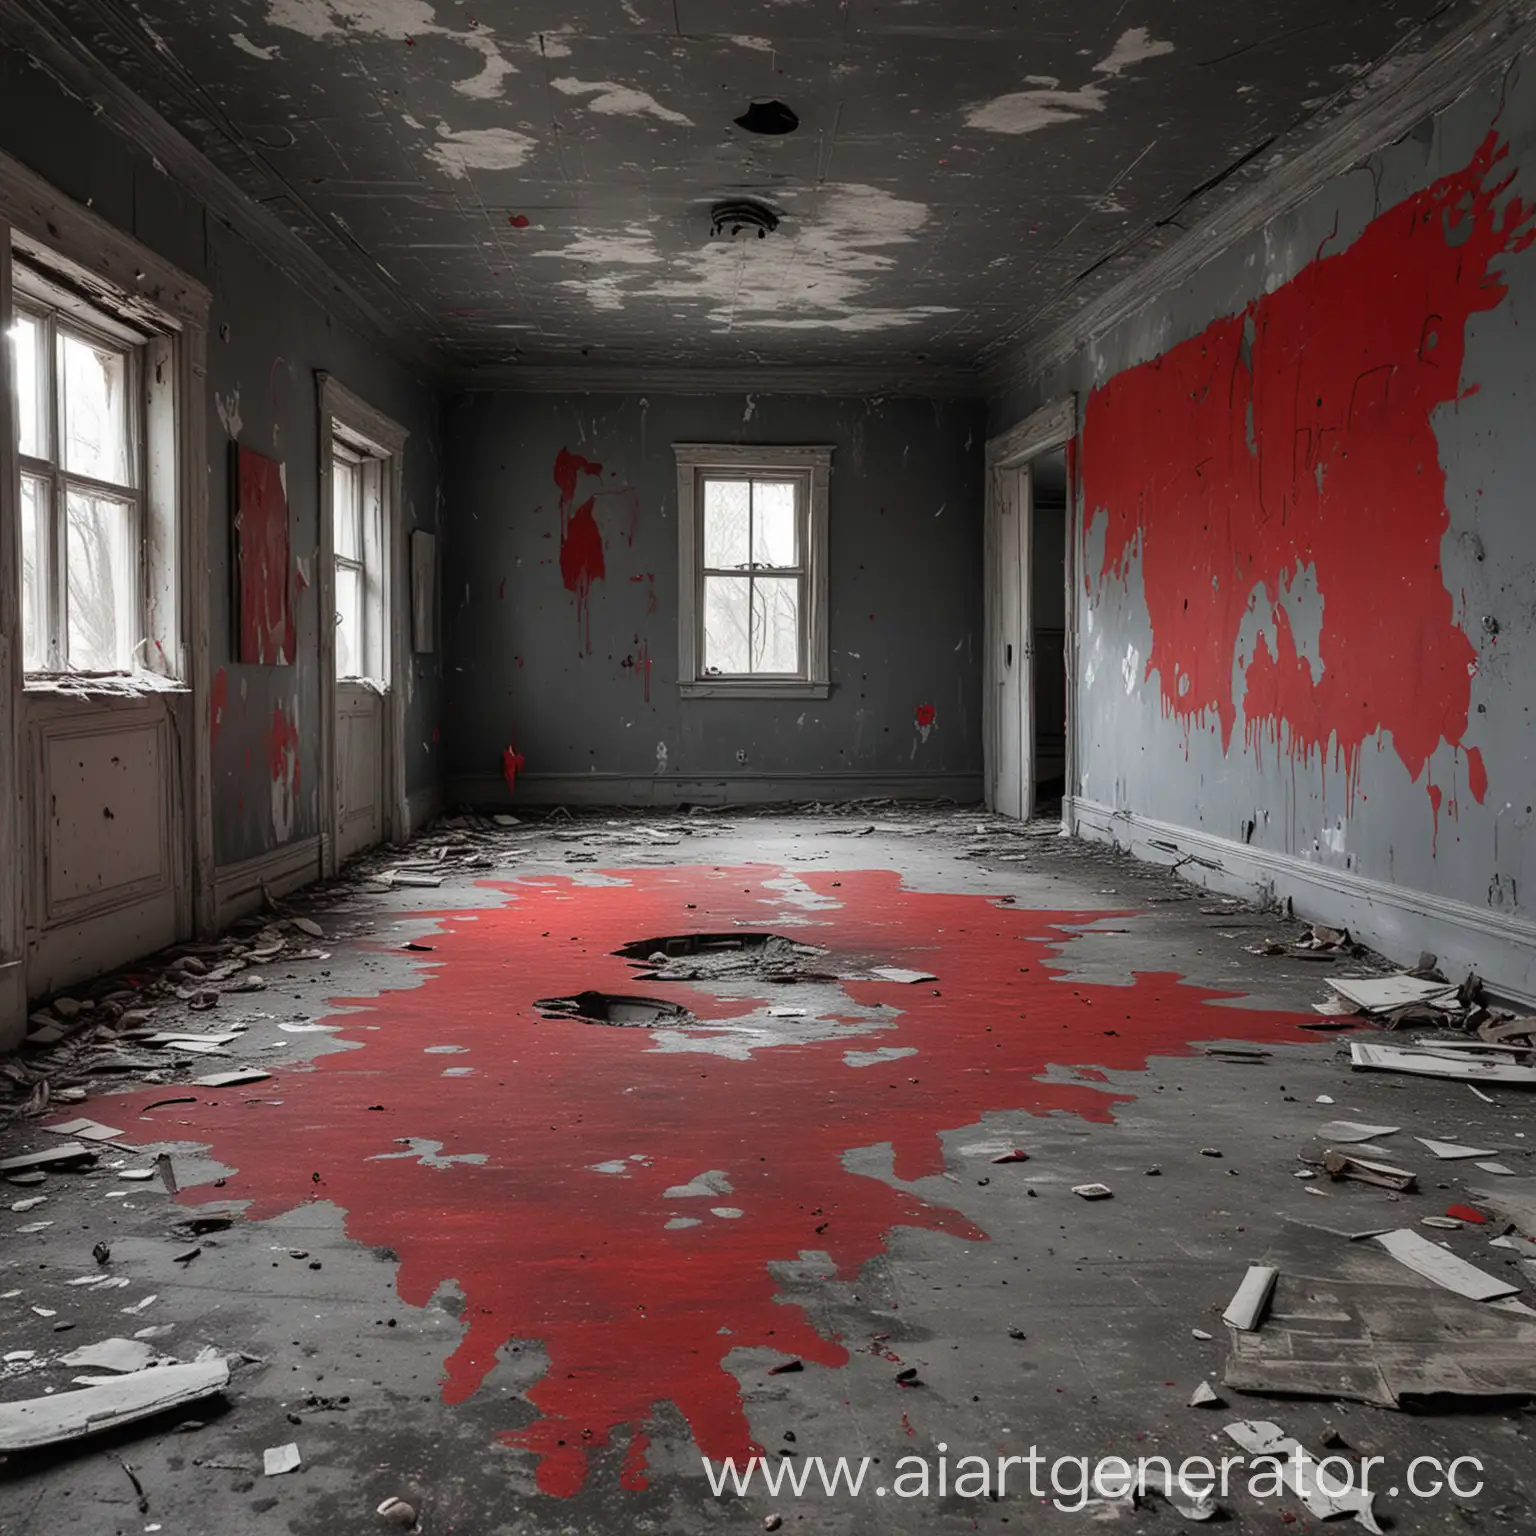 Abandoned-House-Interior-with-Childrens-Red-Paint-Drawings